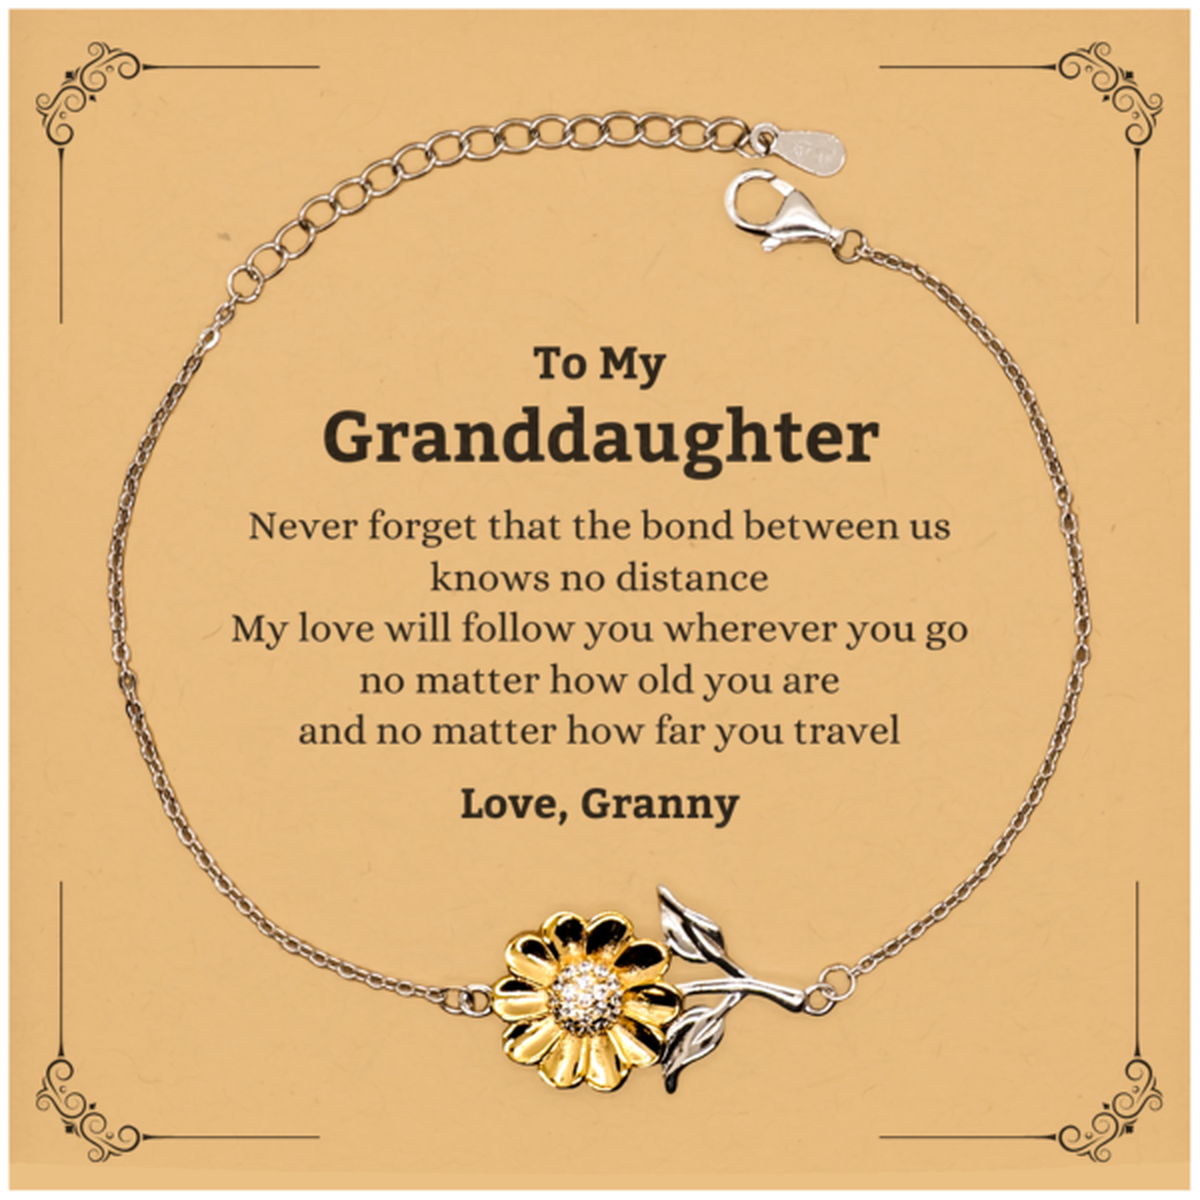 Granddaughter Birthday Gifts from Granny, Adjustable Sunflower Bracelet for Granddaughter Christmas Graduation Unique Gifts Granddaughter Never forget that the bond between us knows no distance. Love, Granny